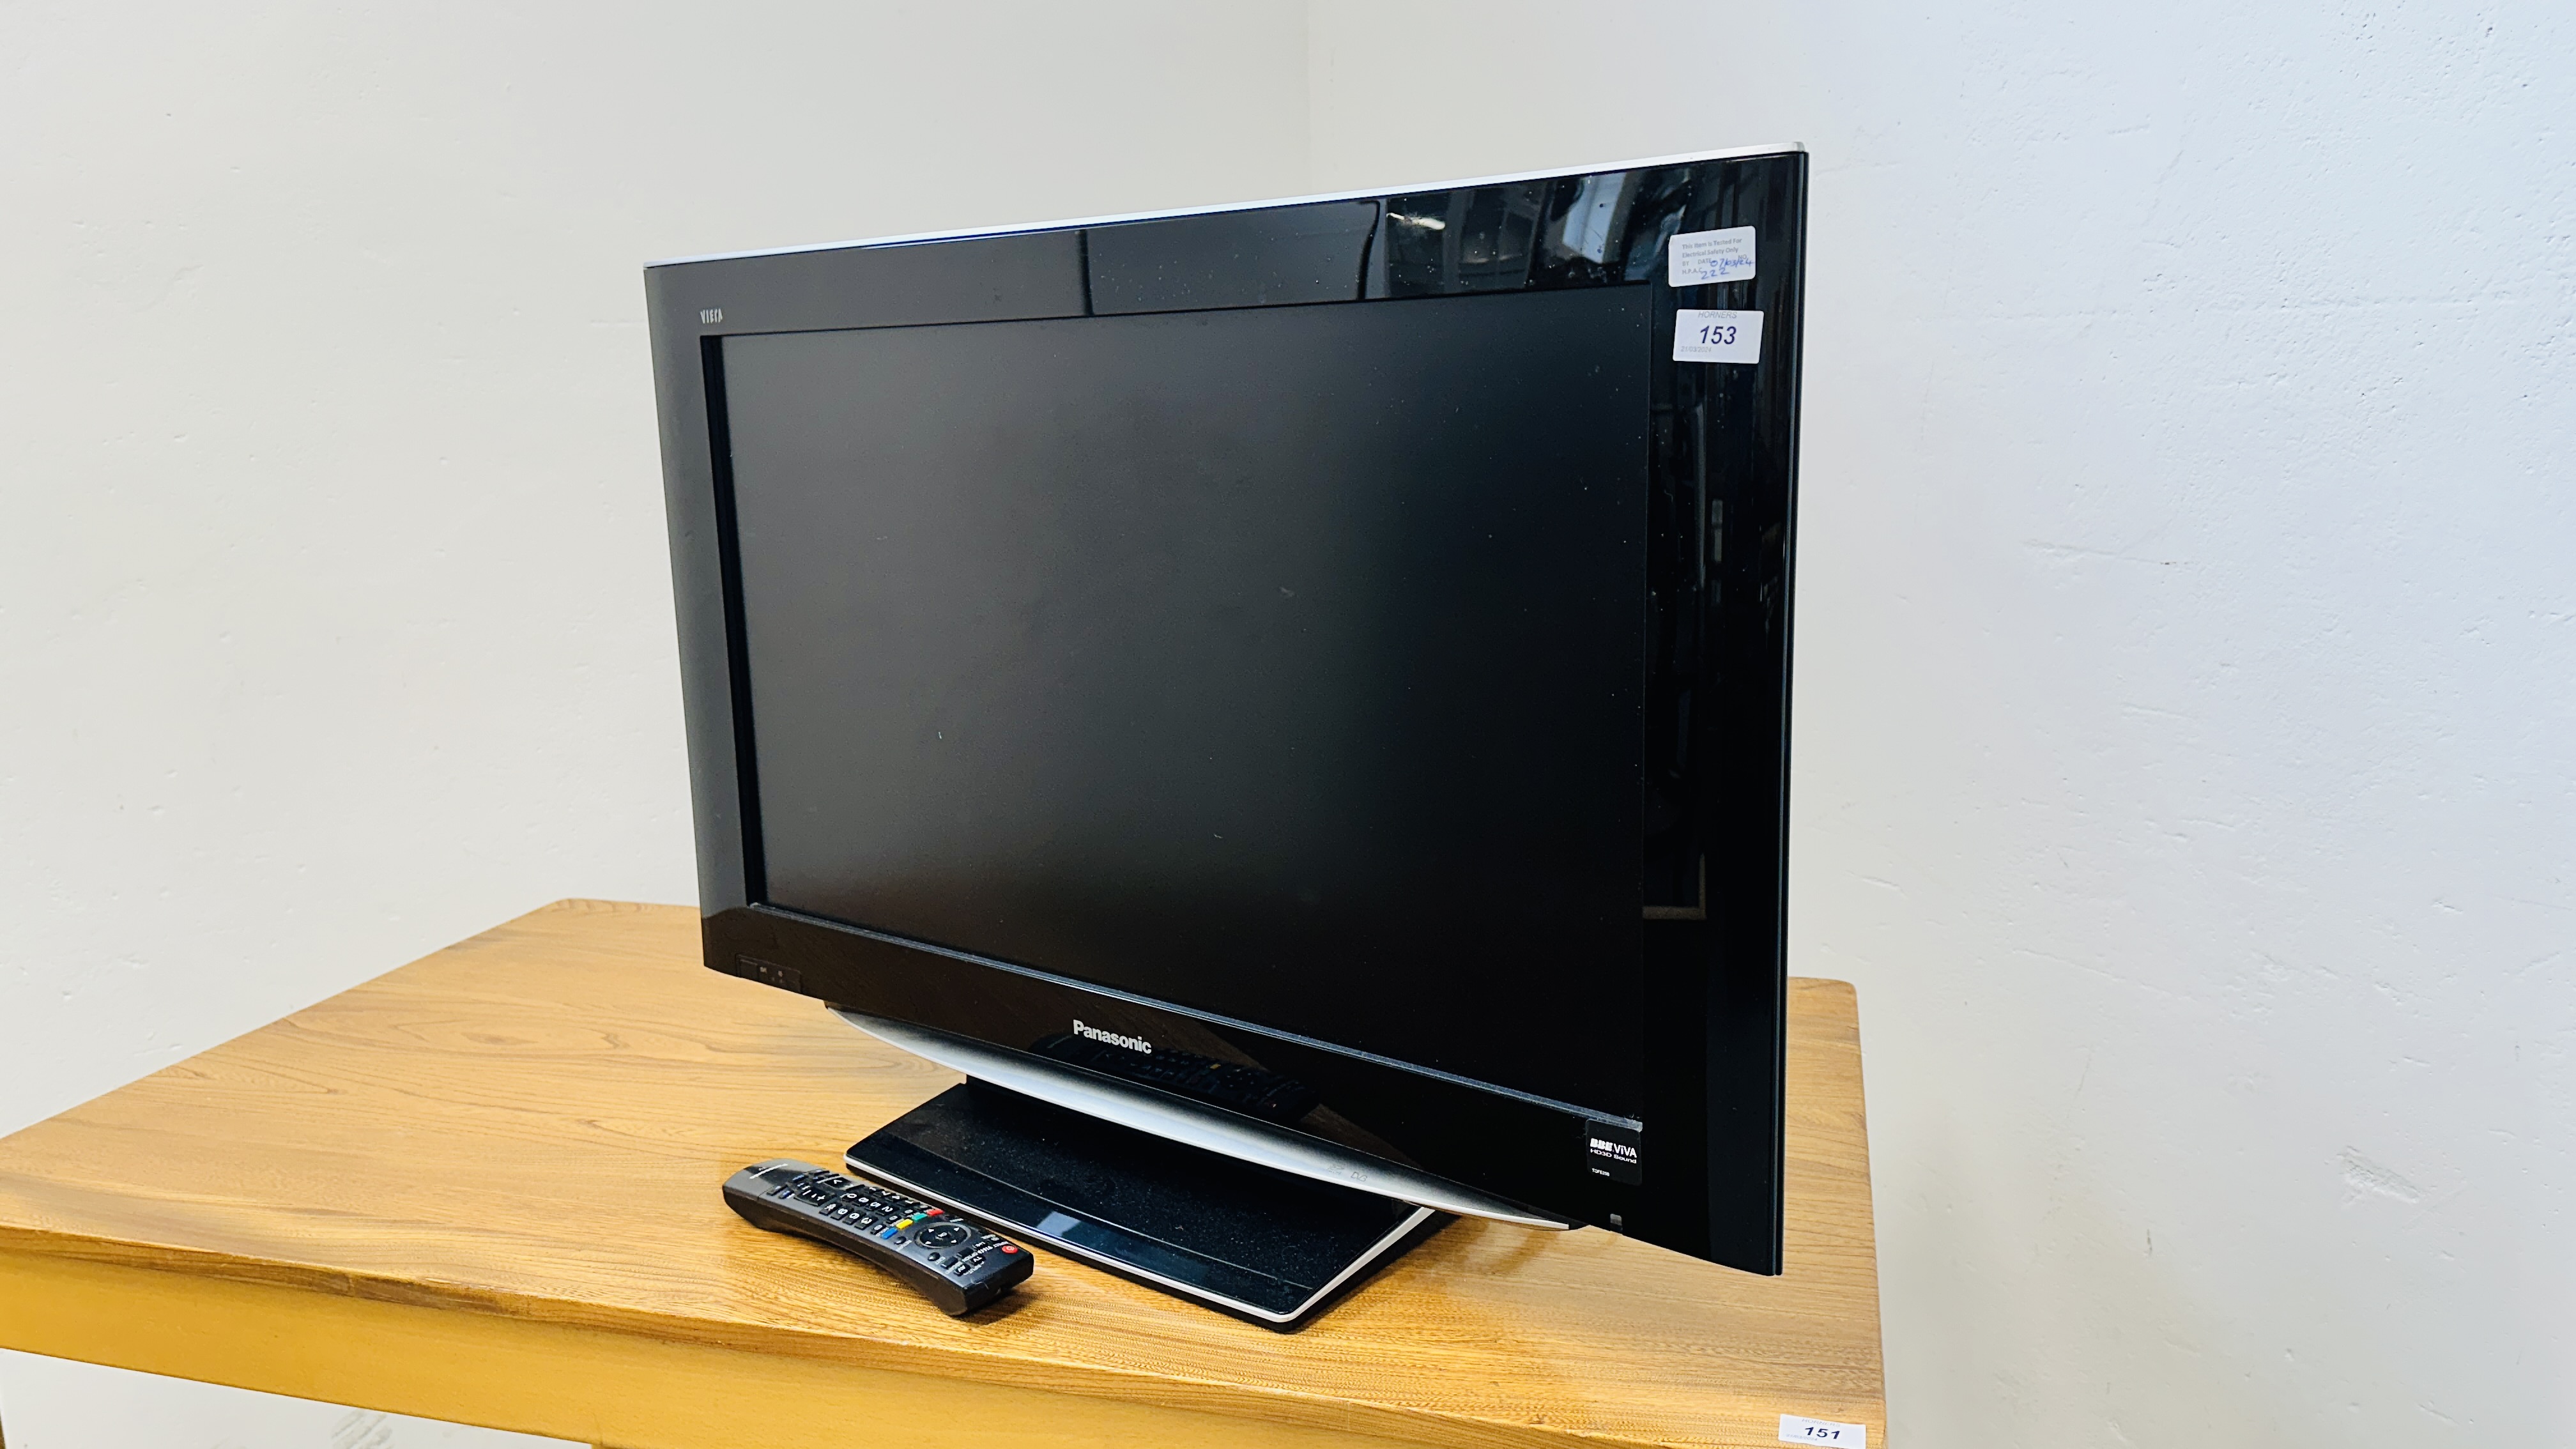 PANASONIC VIERA 32" TV WITH REMOTE - SOLD AS SEEN. - Image 3 of 3